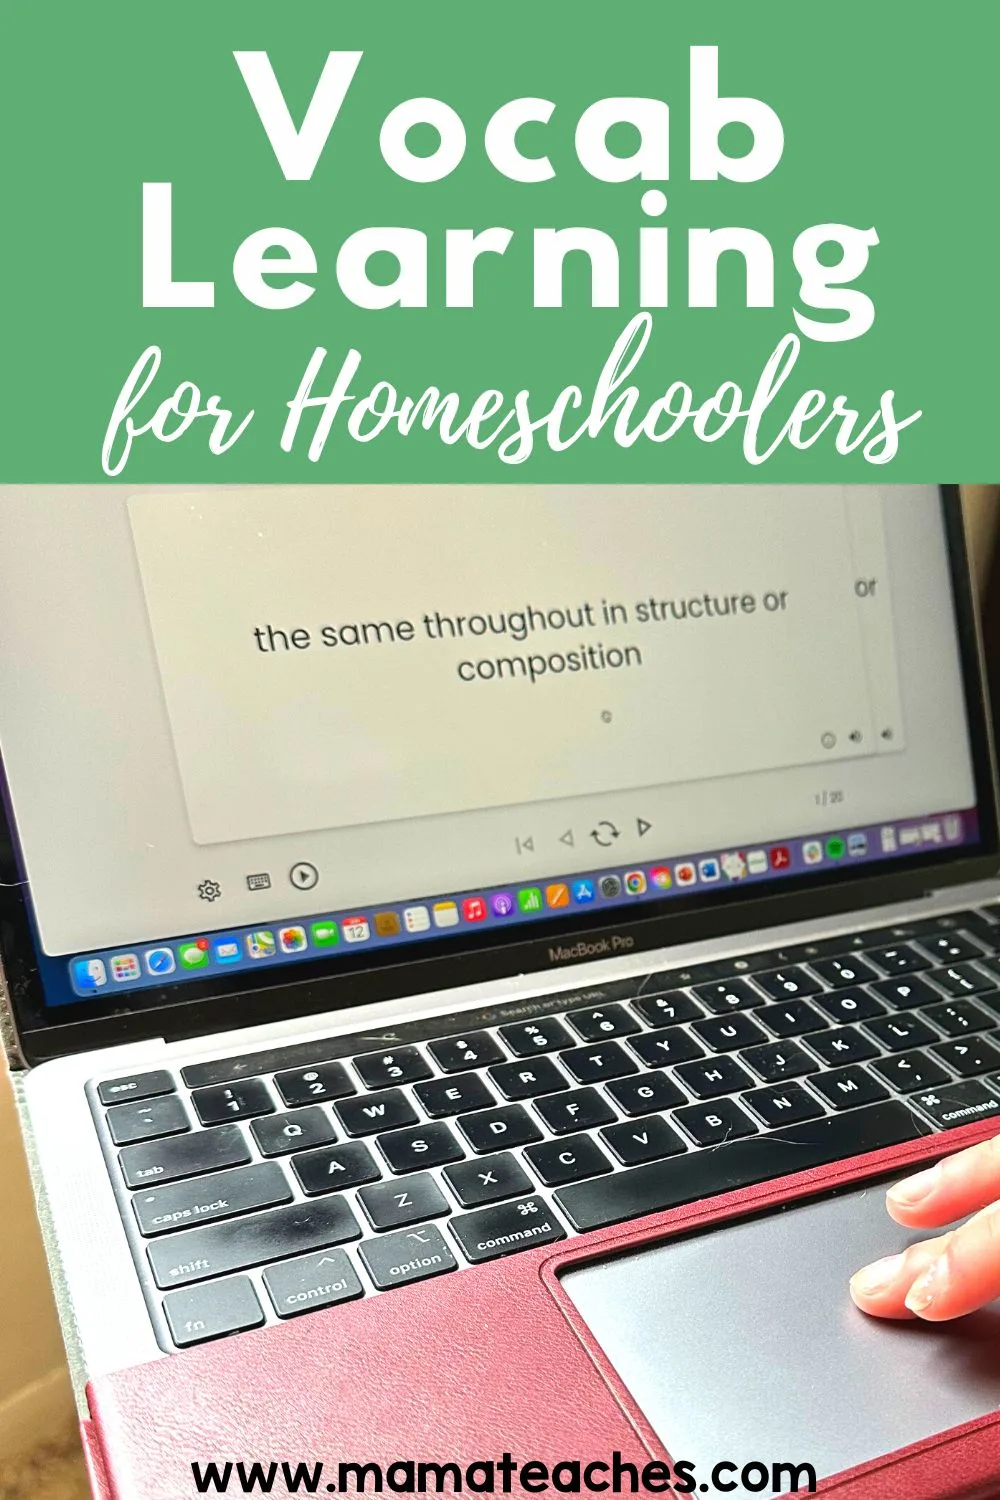 Vocabulary Learning for Homeschoolers